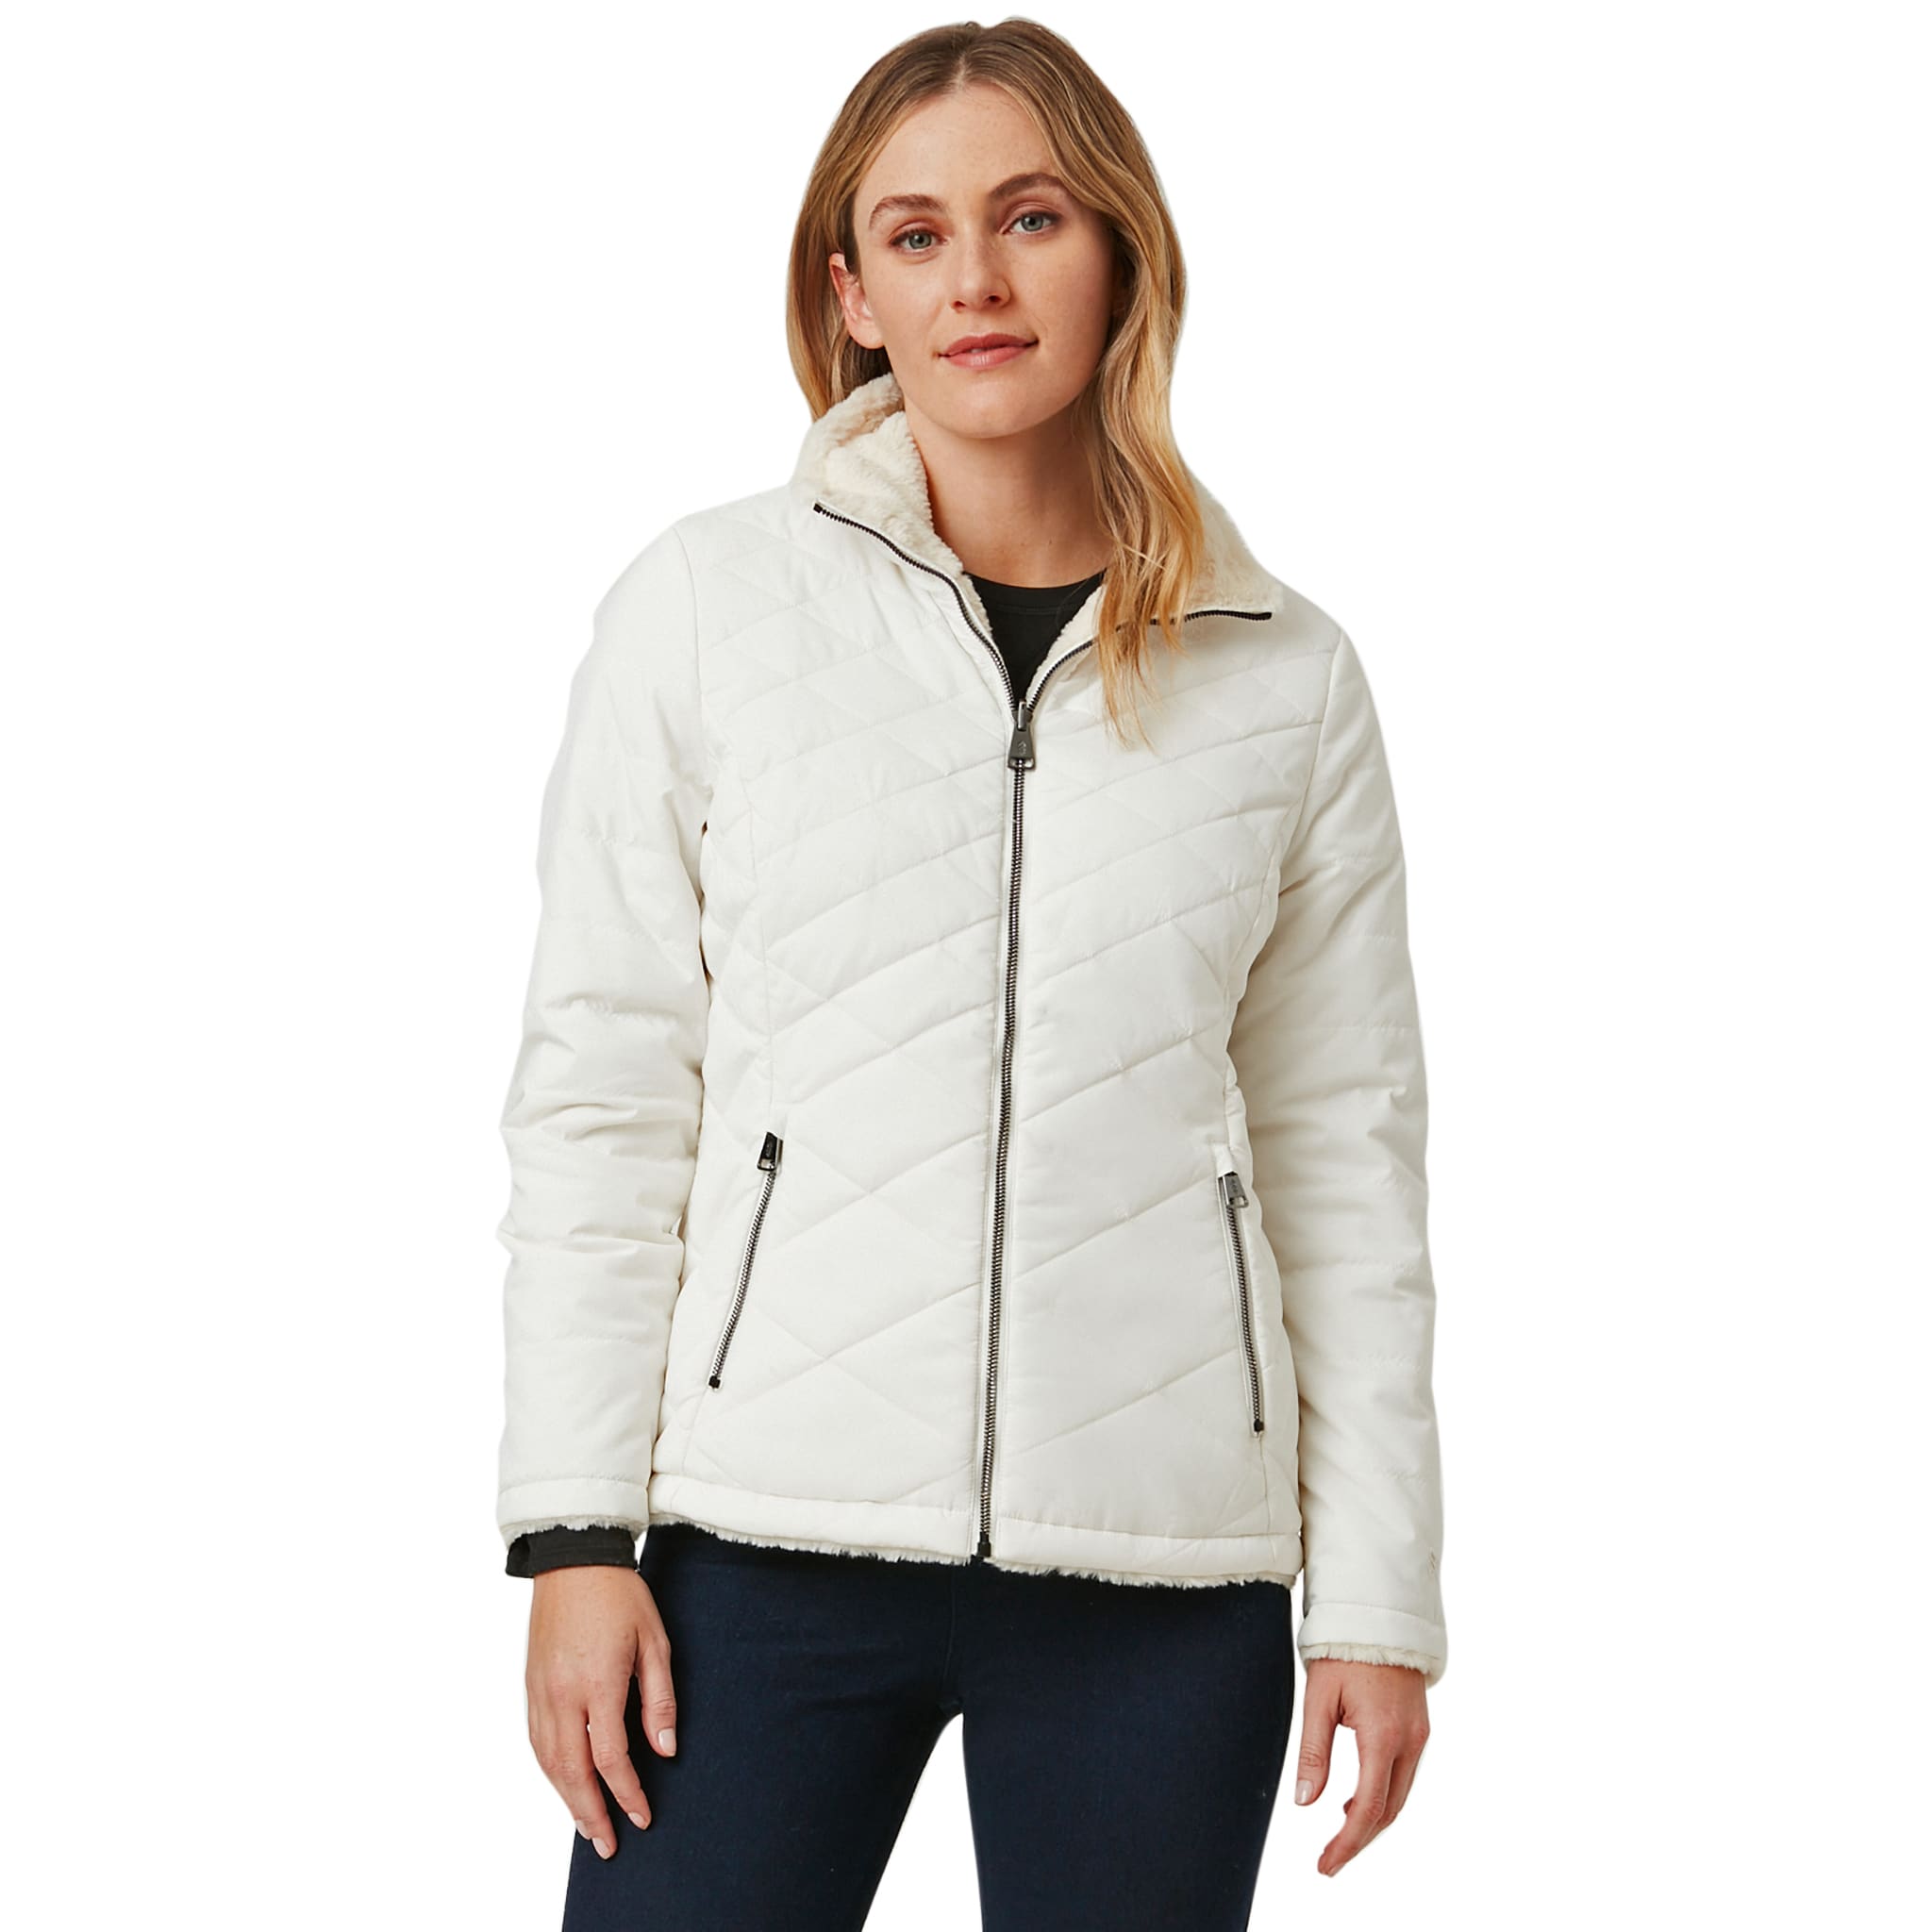 Free Country Jackets Review - Must Read This Before Buying